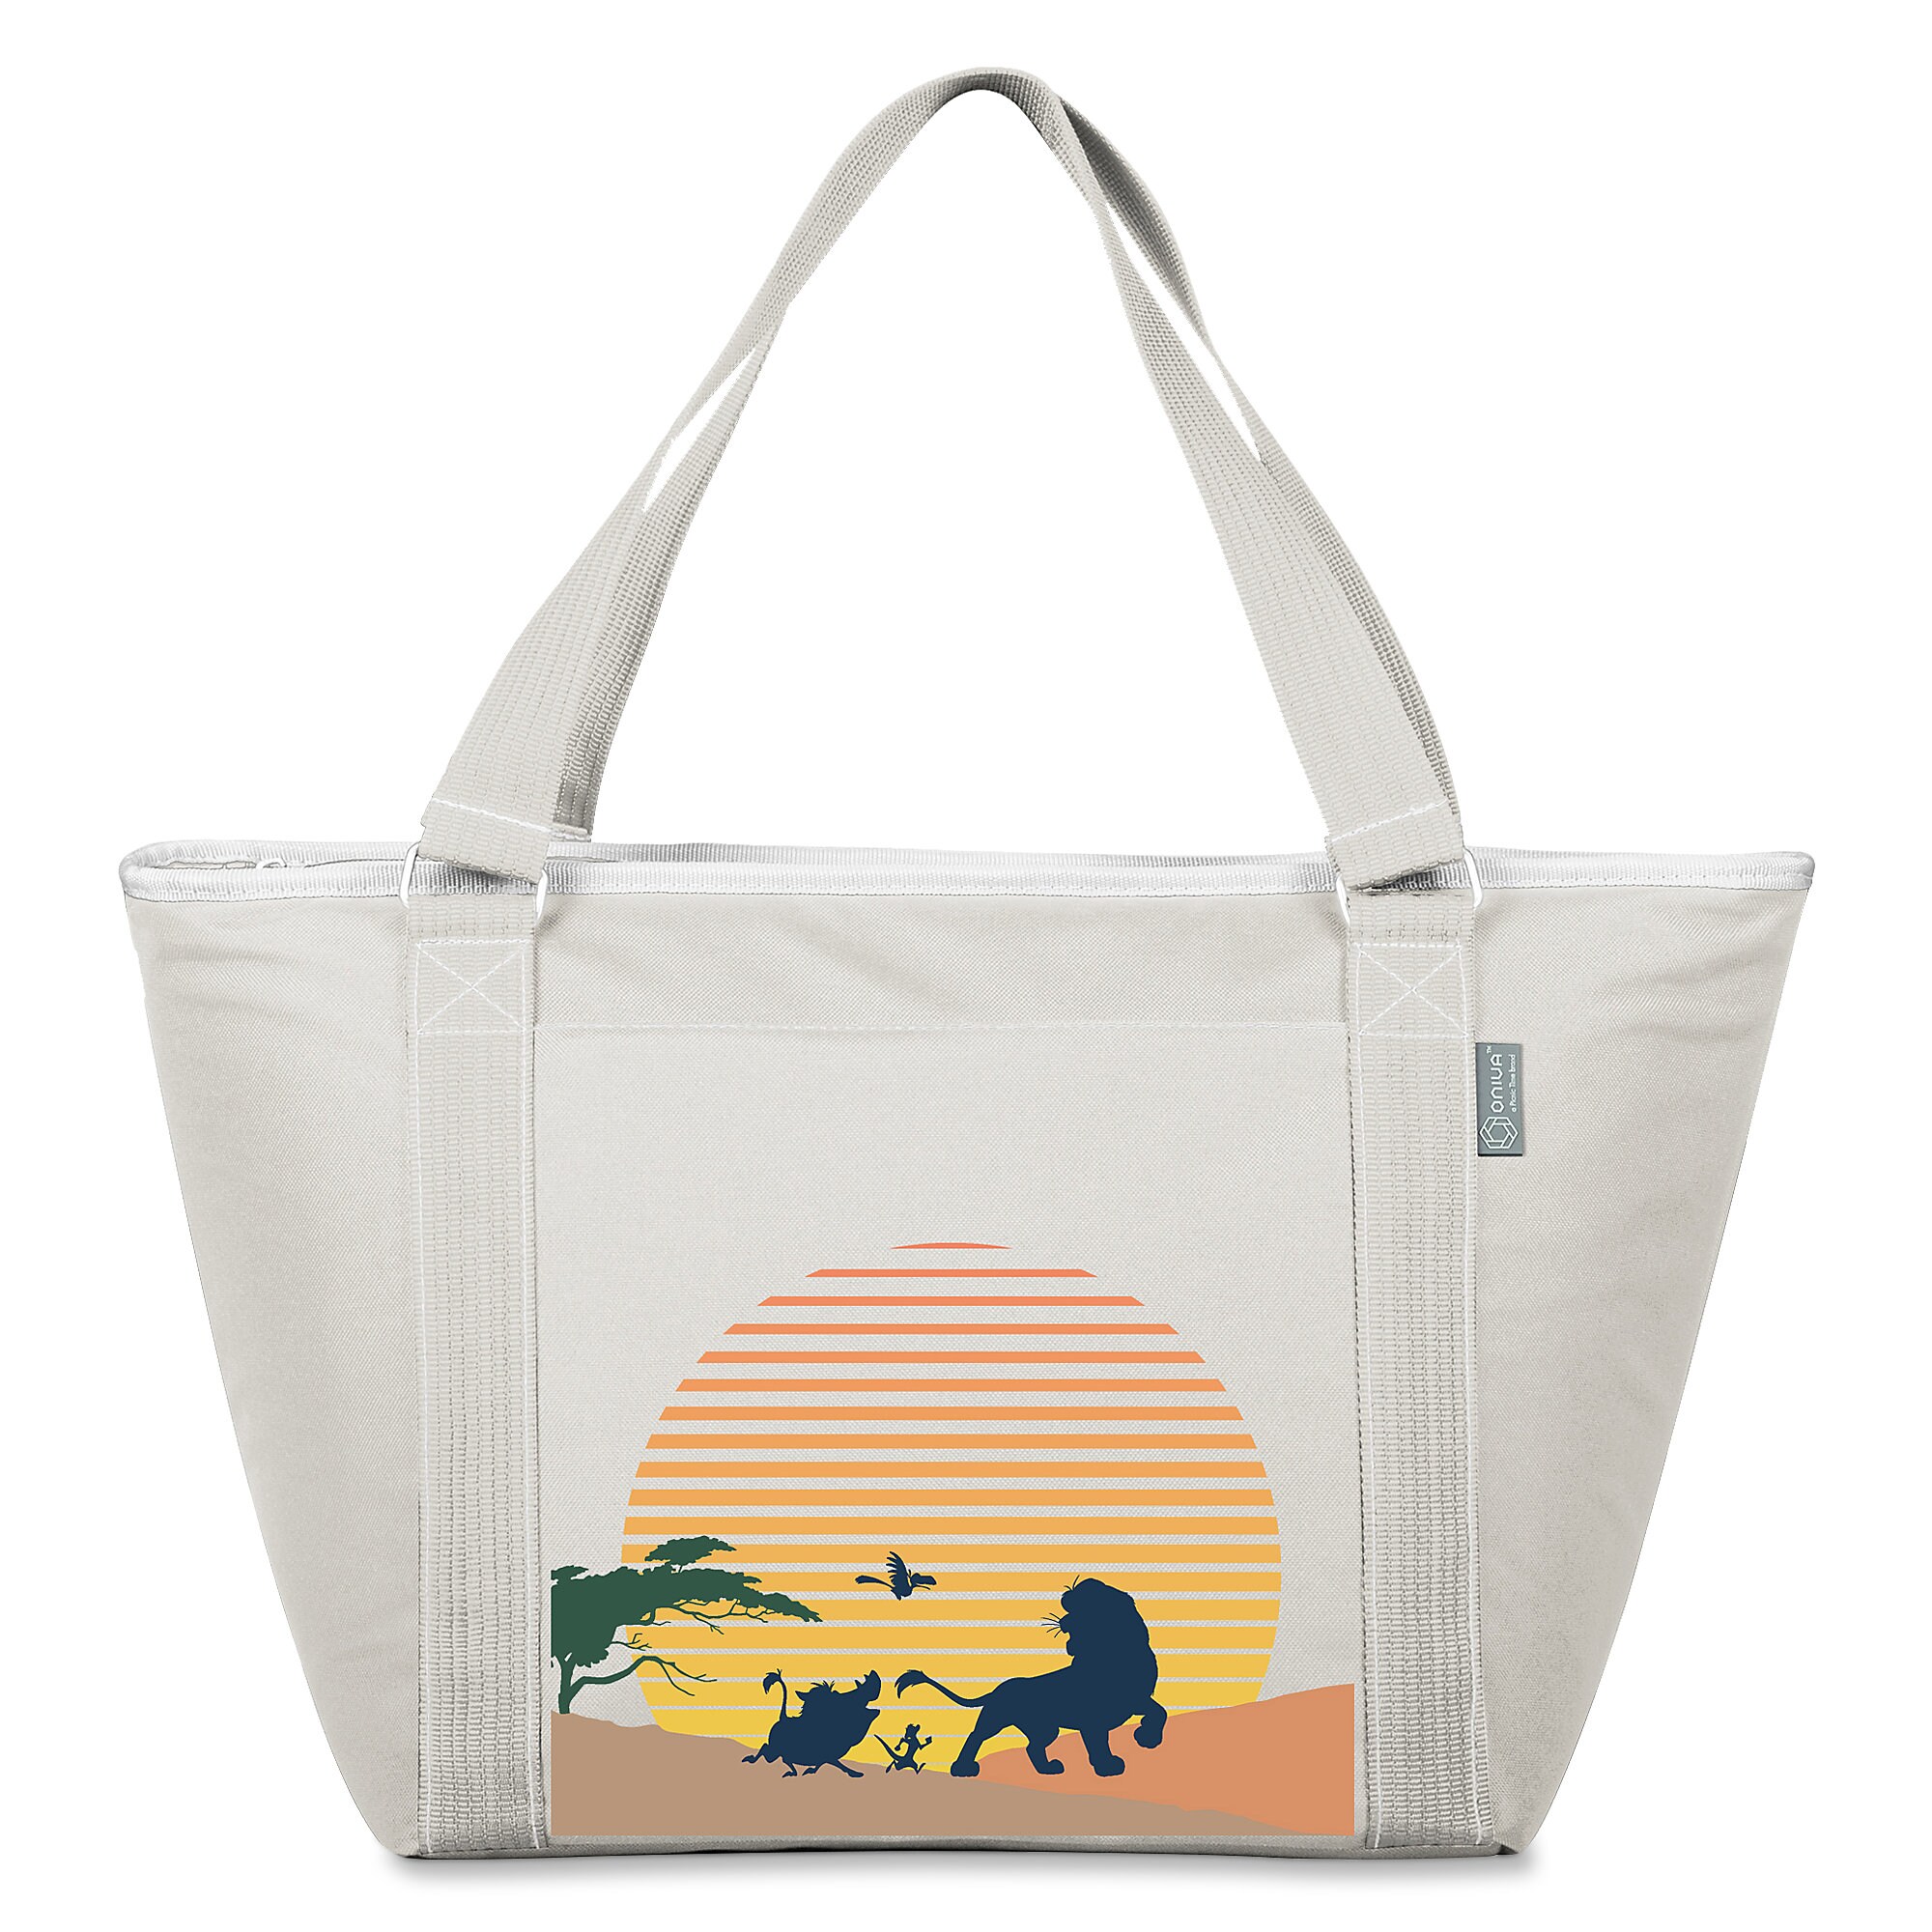 The Lion King Cooler Tote